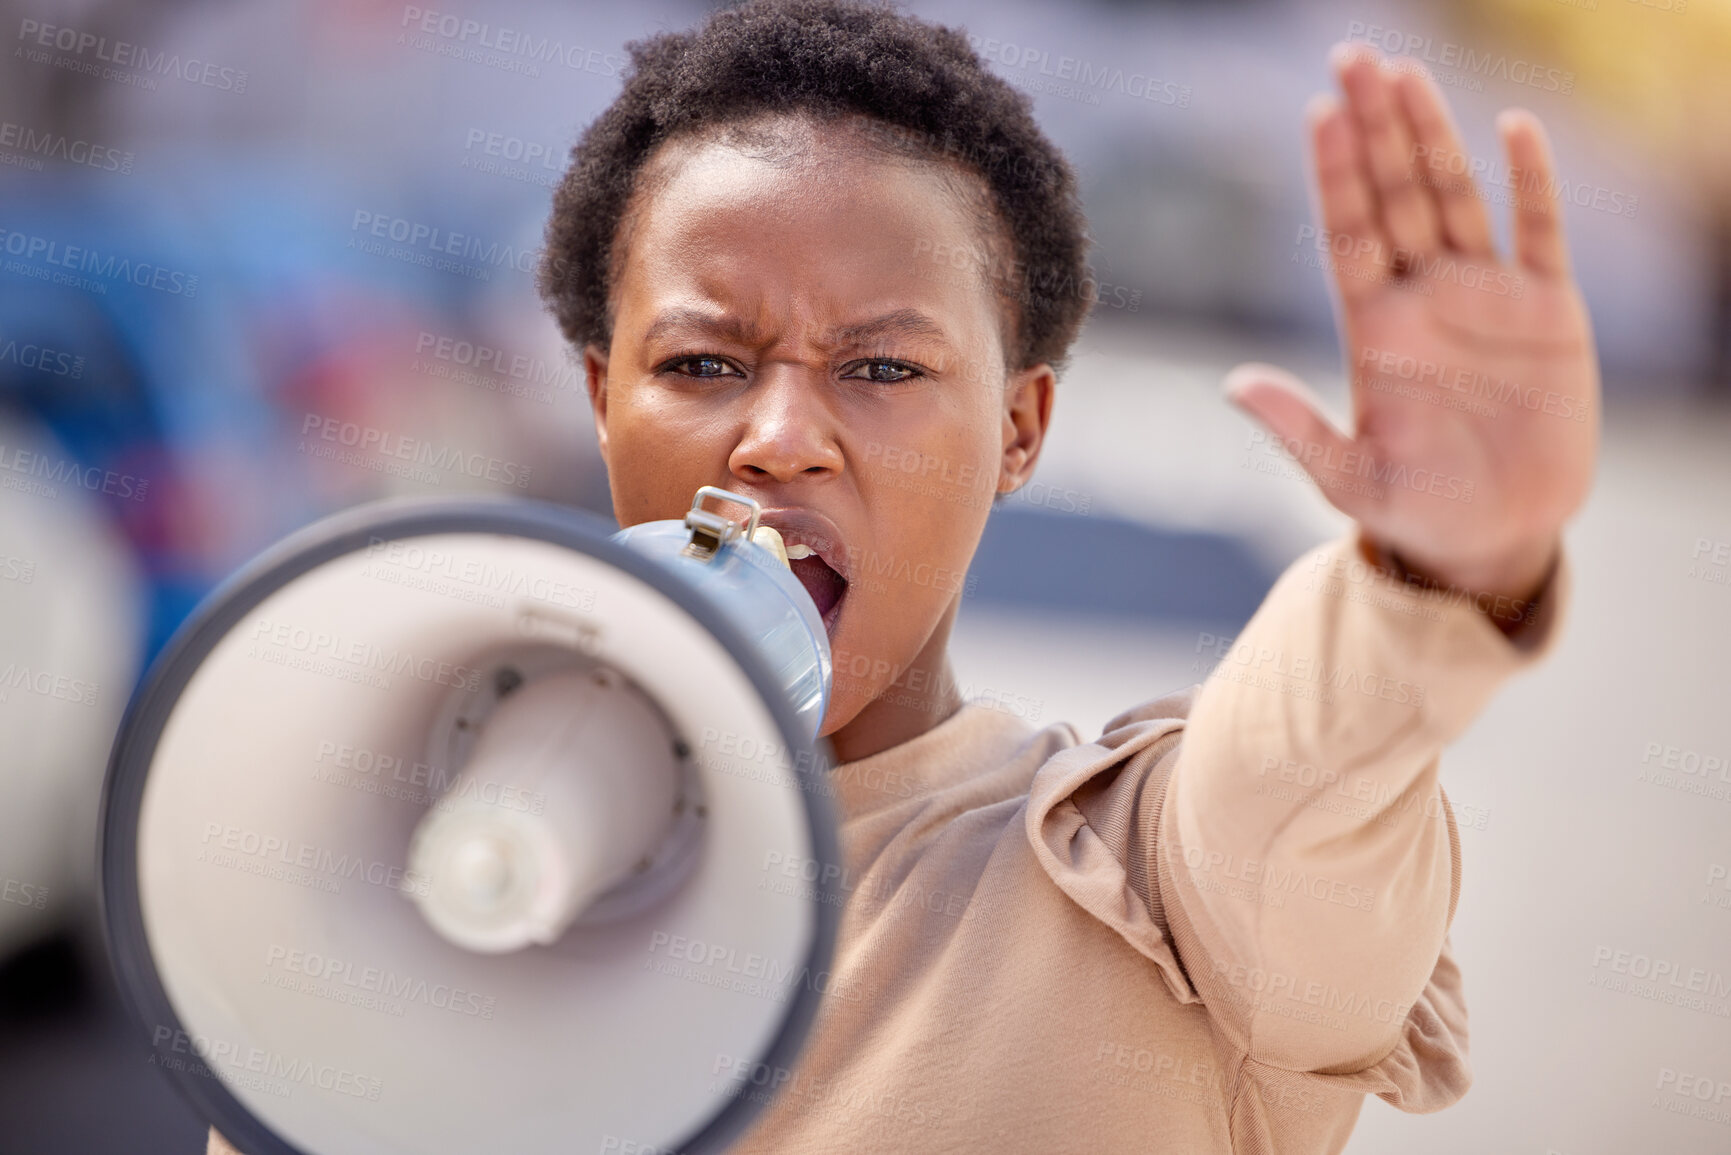 Buy stock photo Shot of a young woman with her hand raised speaking through a megaphone at a protest